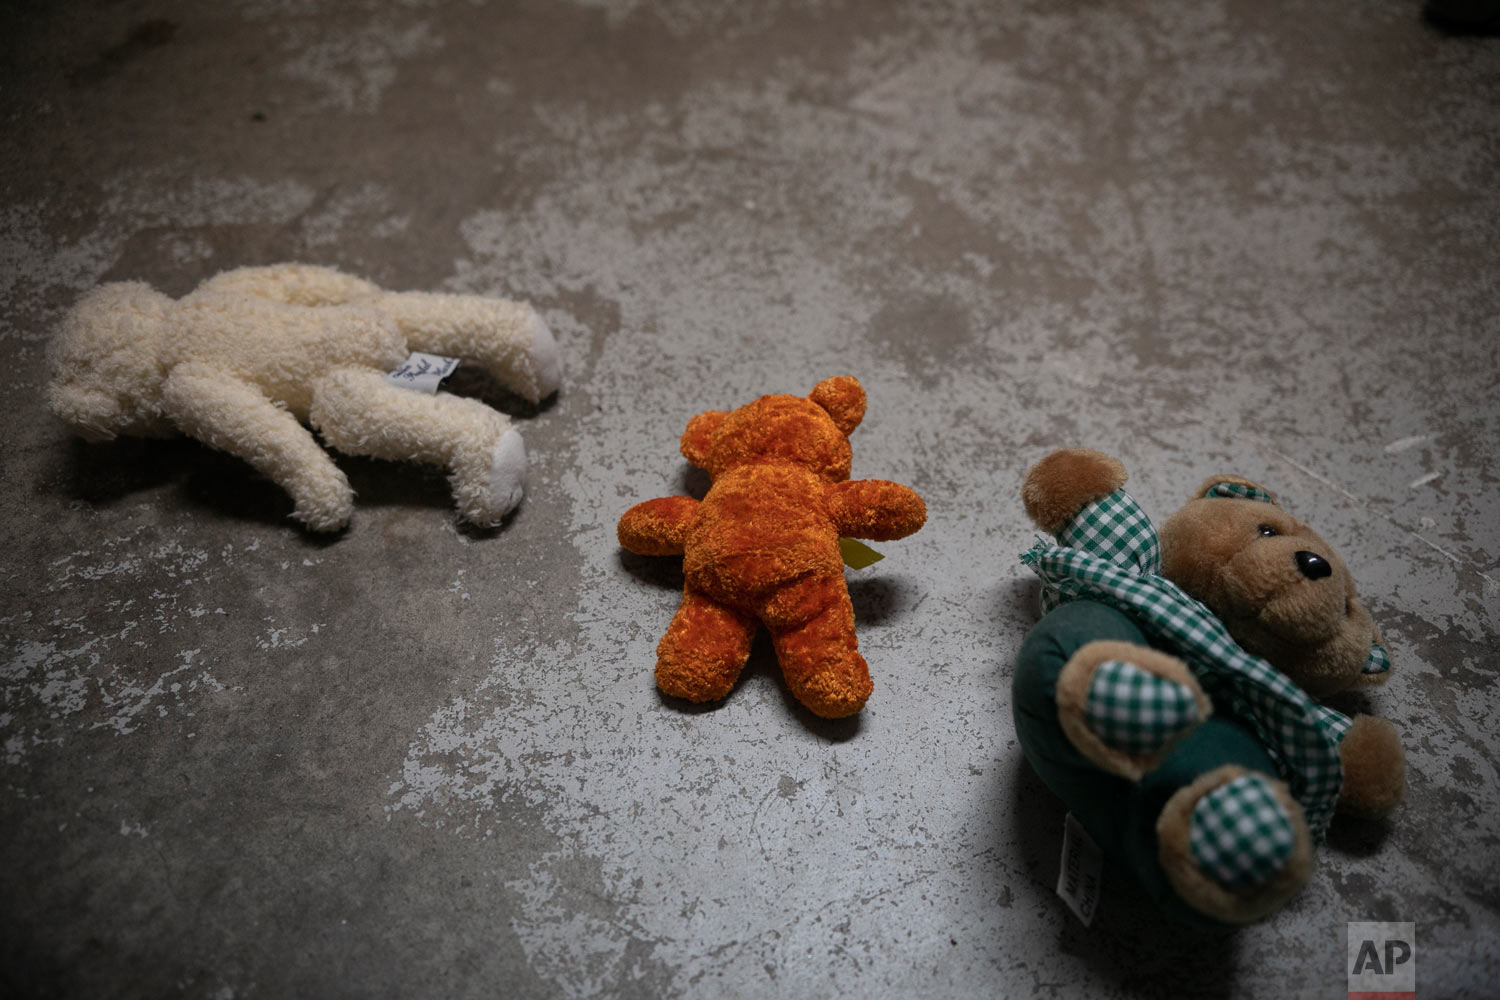  Teddy bears lie on the floor of the dormitory where Honduran migrant Josue Mejia Lucero's 3-year-old nephew Jefferson is staying with his mother, at Agape World Mission shelter in Tijuana, Mexico, Feb. 7, 2019 photo. (AP Photo/Emilio Espejel) 